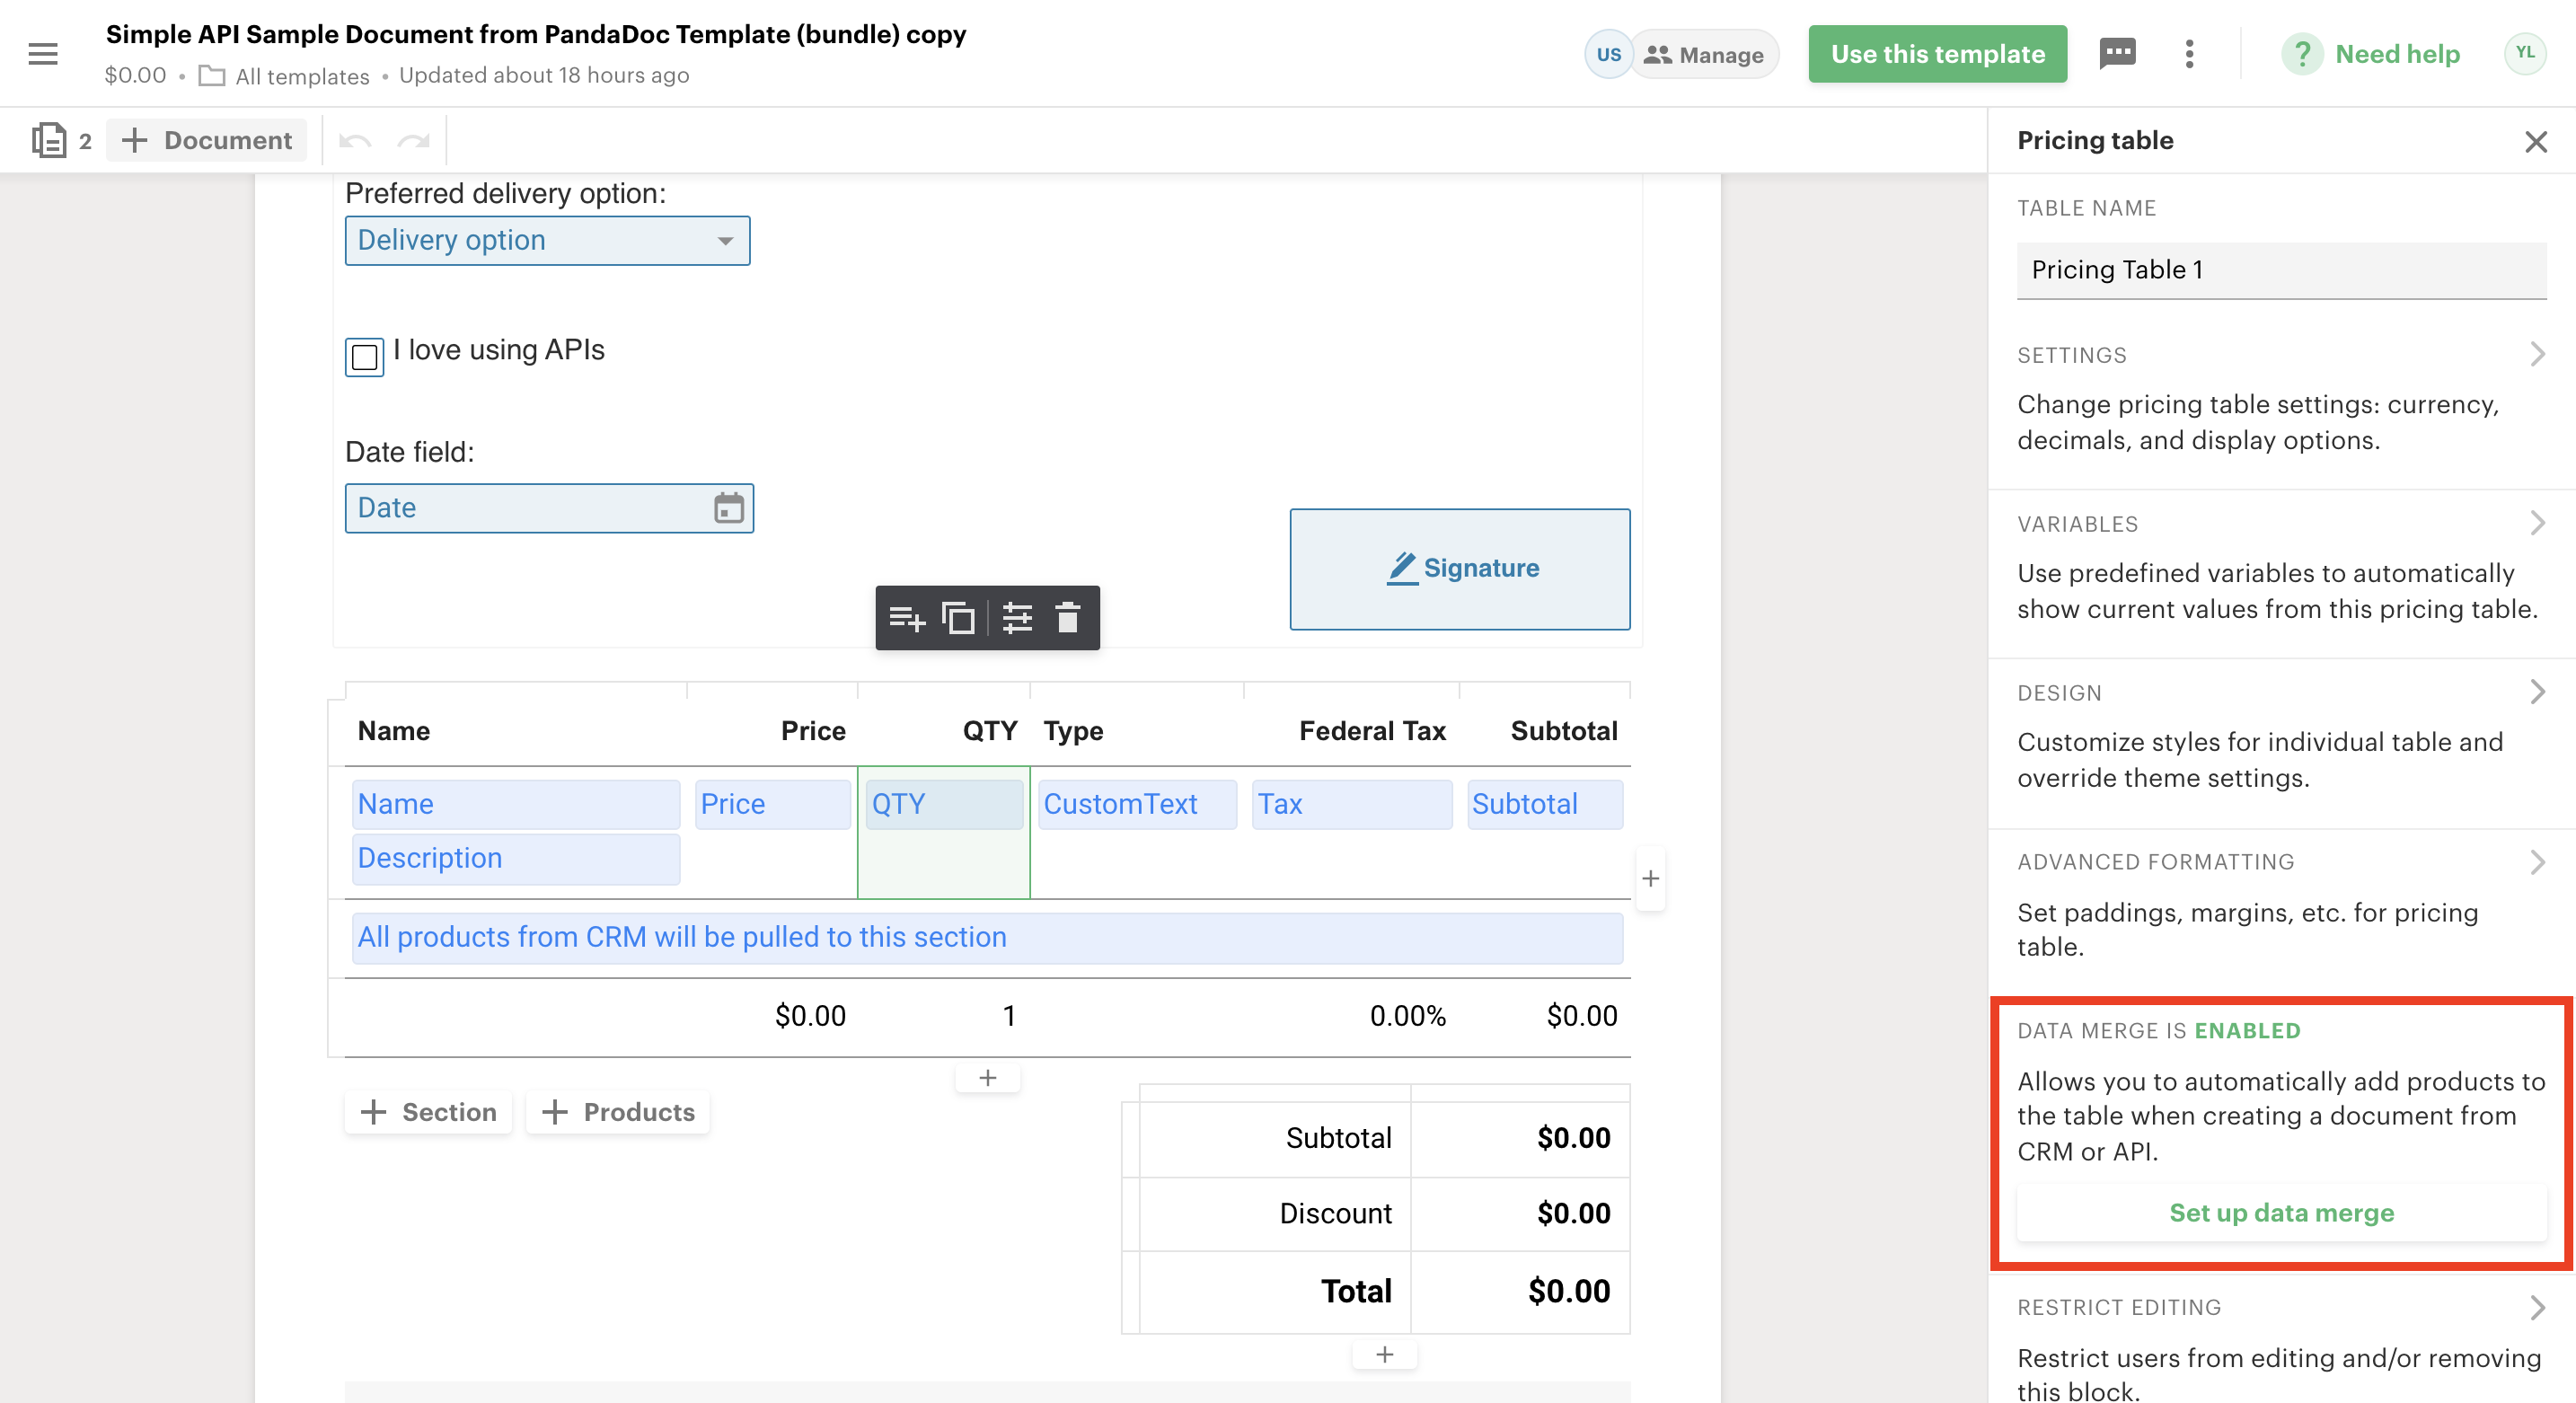 Template -> Pricing Table Settings -> Set up data merge